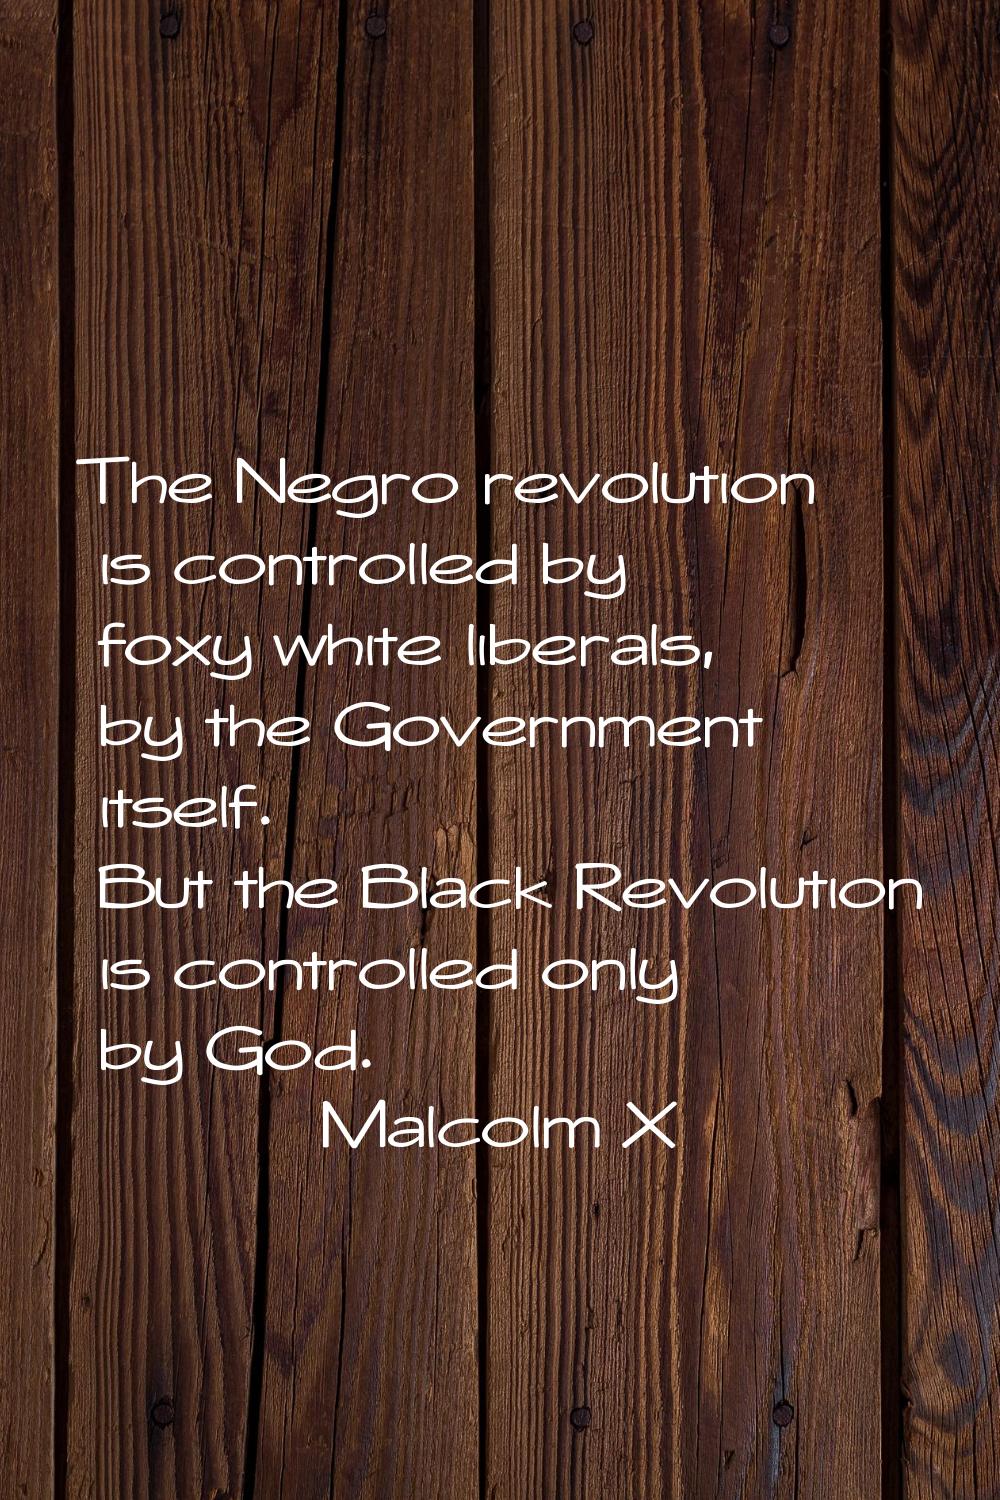 The Negro revolution is controlled by foxy white liberals, by the Government itself. But the Black 